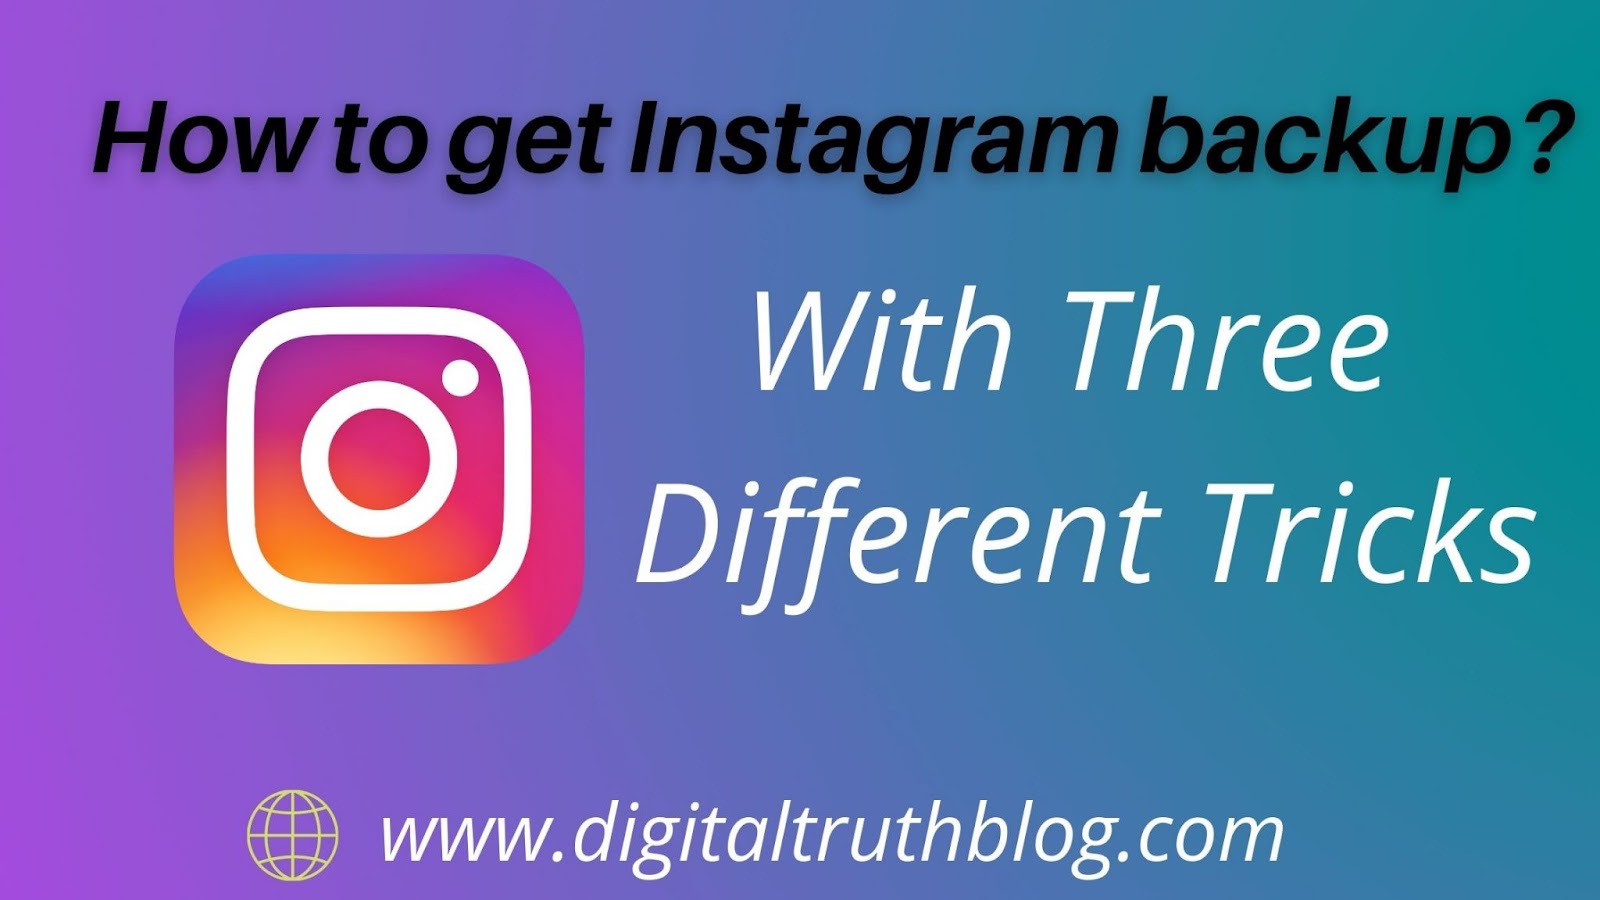 How to get Instagram post and photo backup?